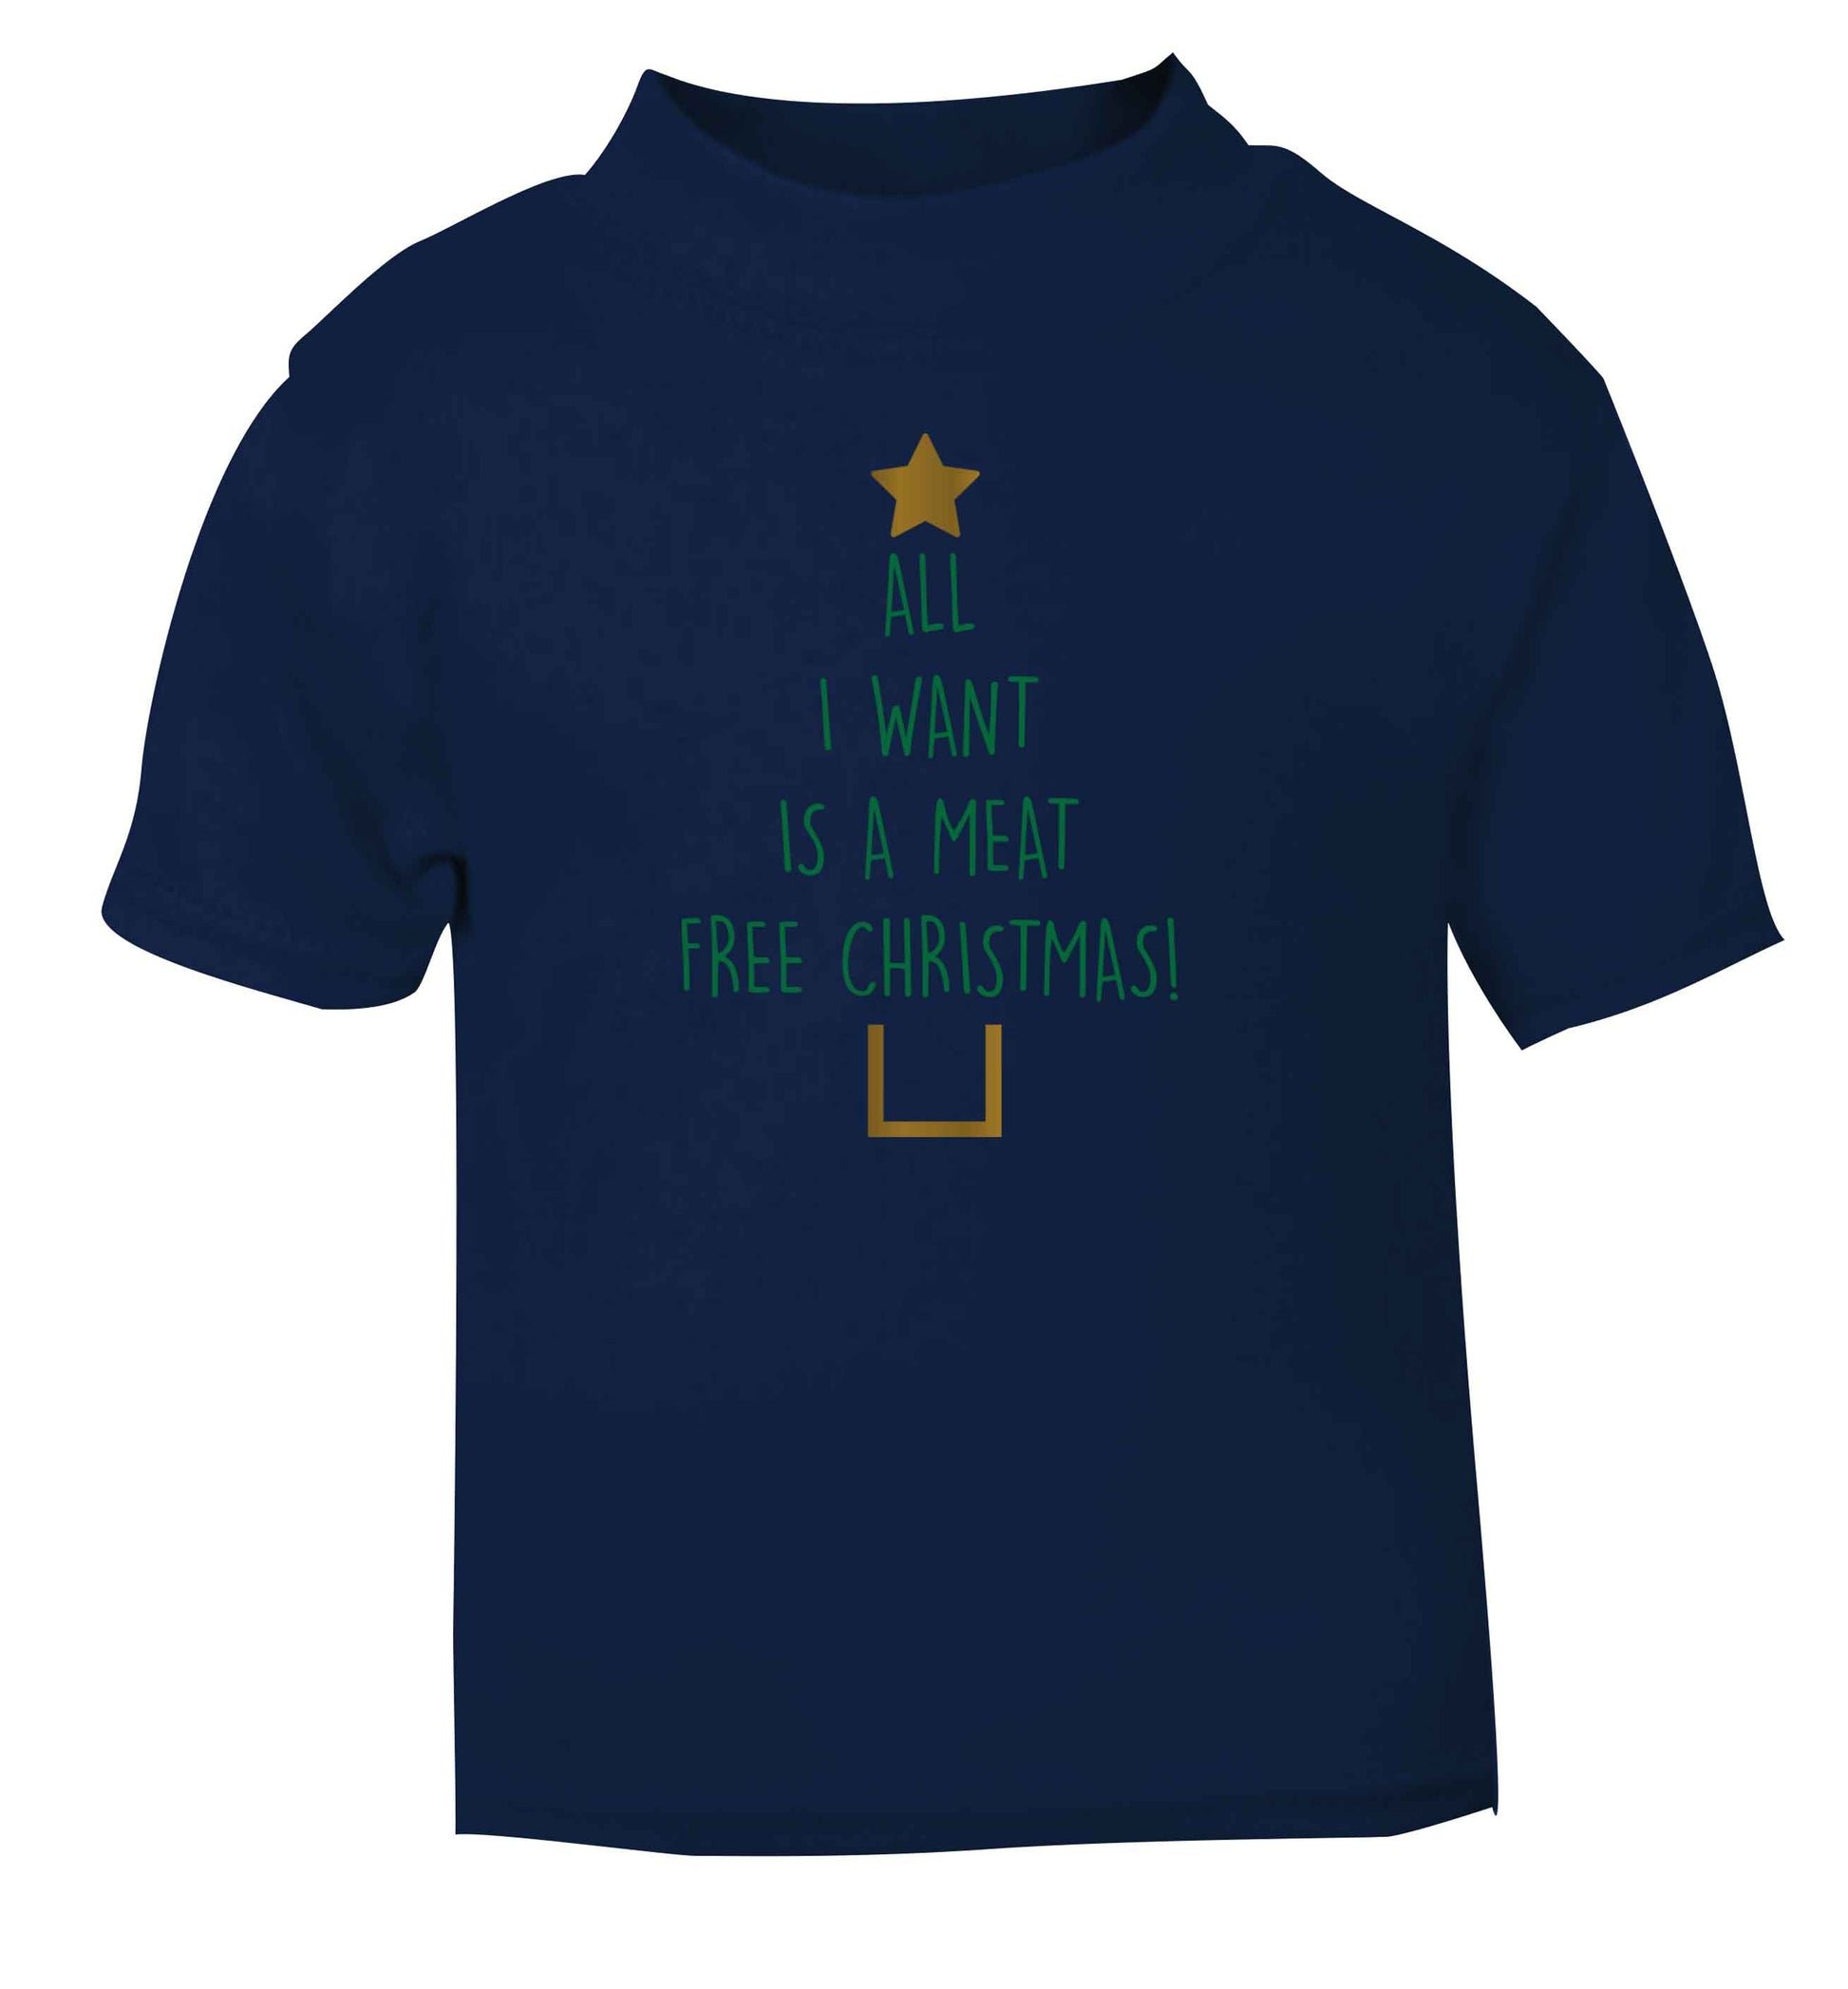 All I want is a meat free Christmas navy Baby Toddler Tshirt 2 Years